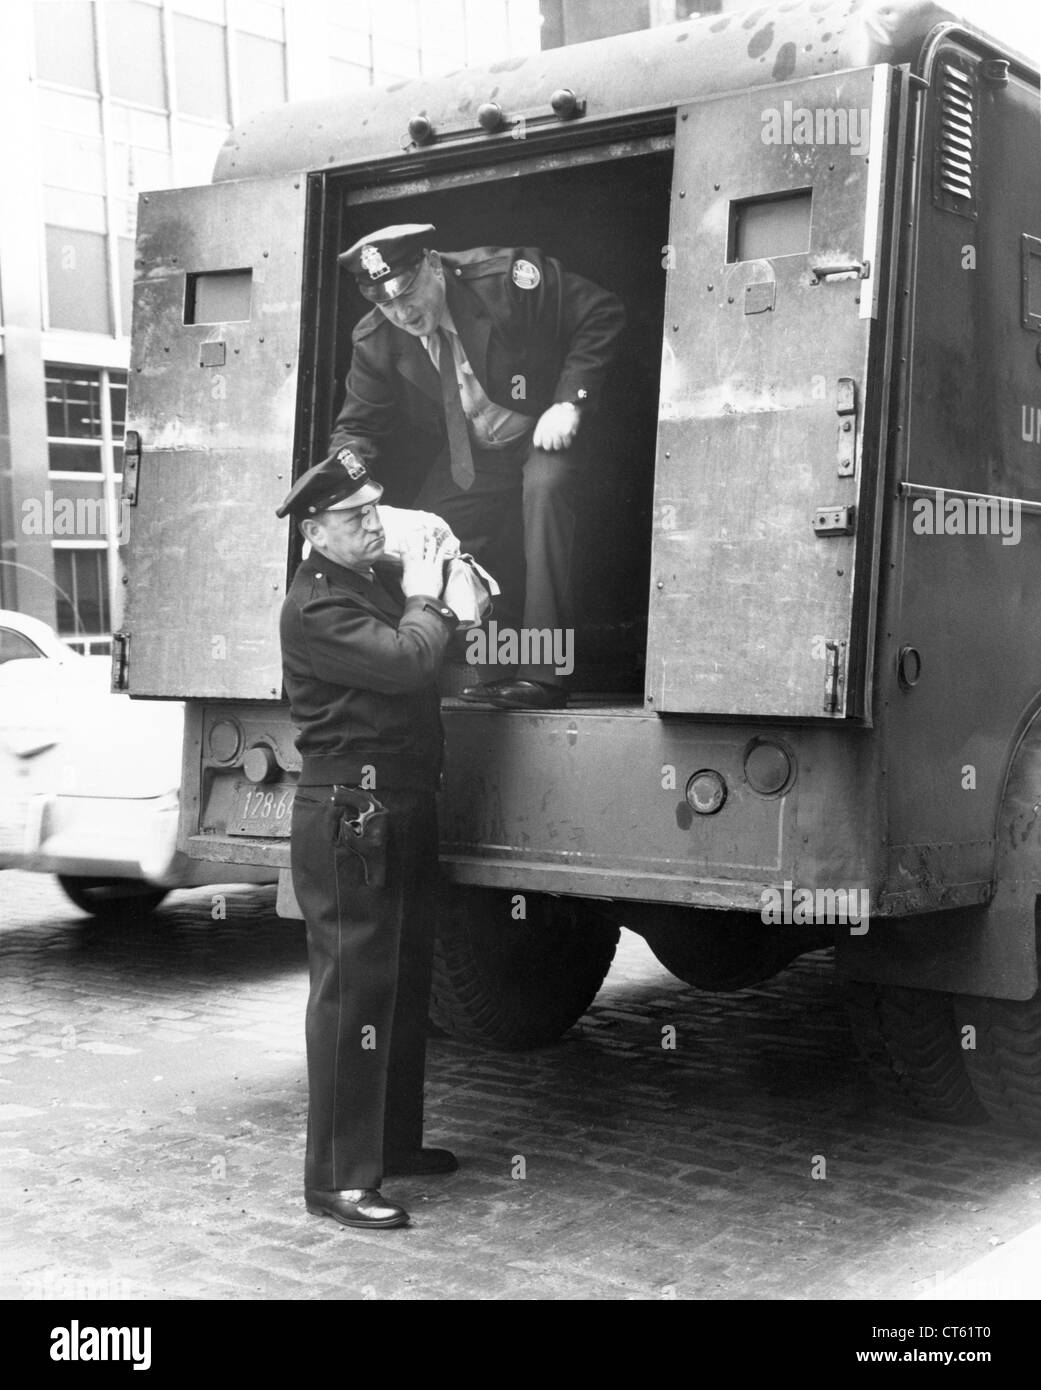 Security guards unloading armored truck Stock Photo